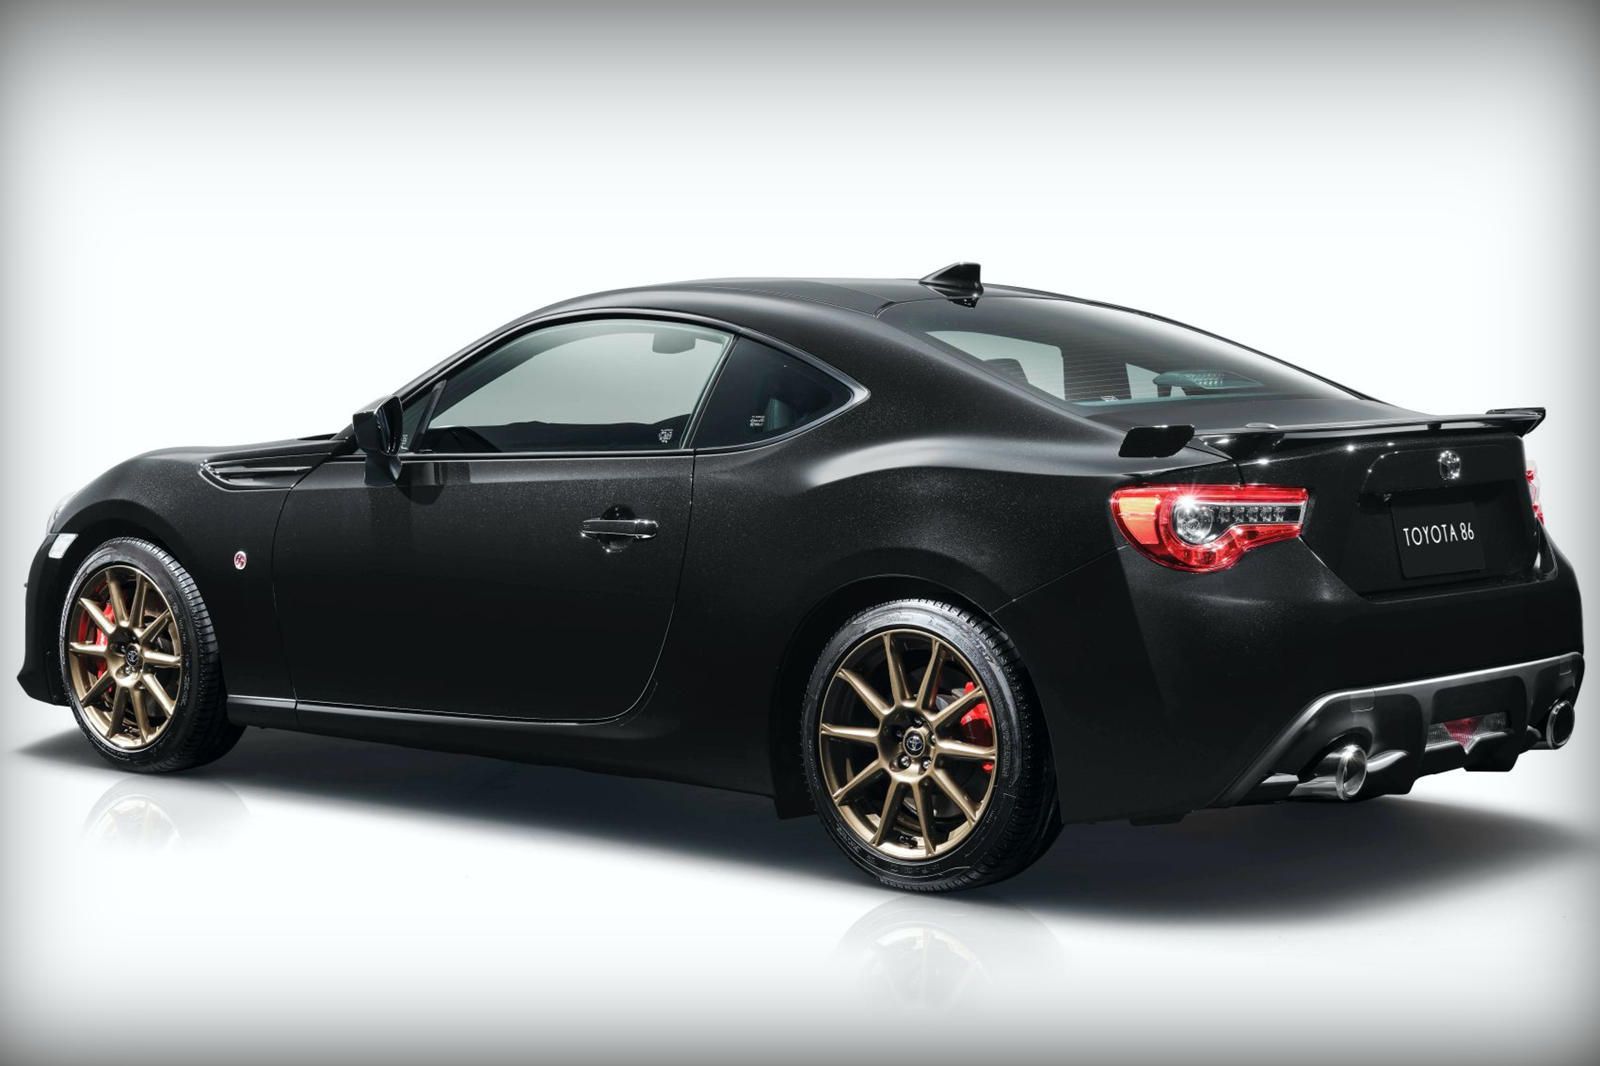 2021 Toyota 86 Black Limited Edition